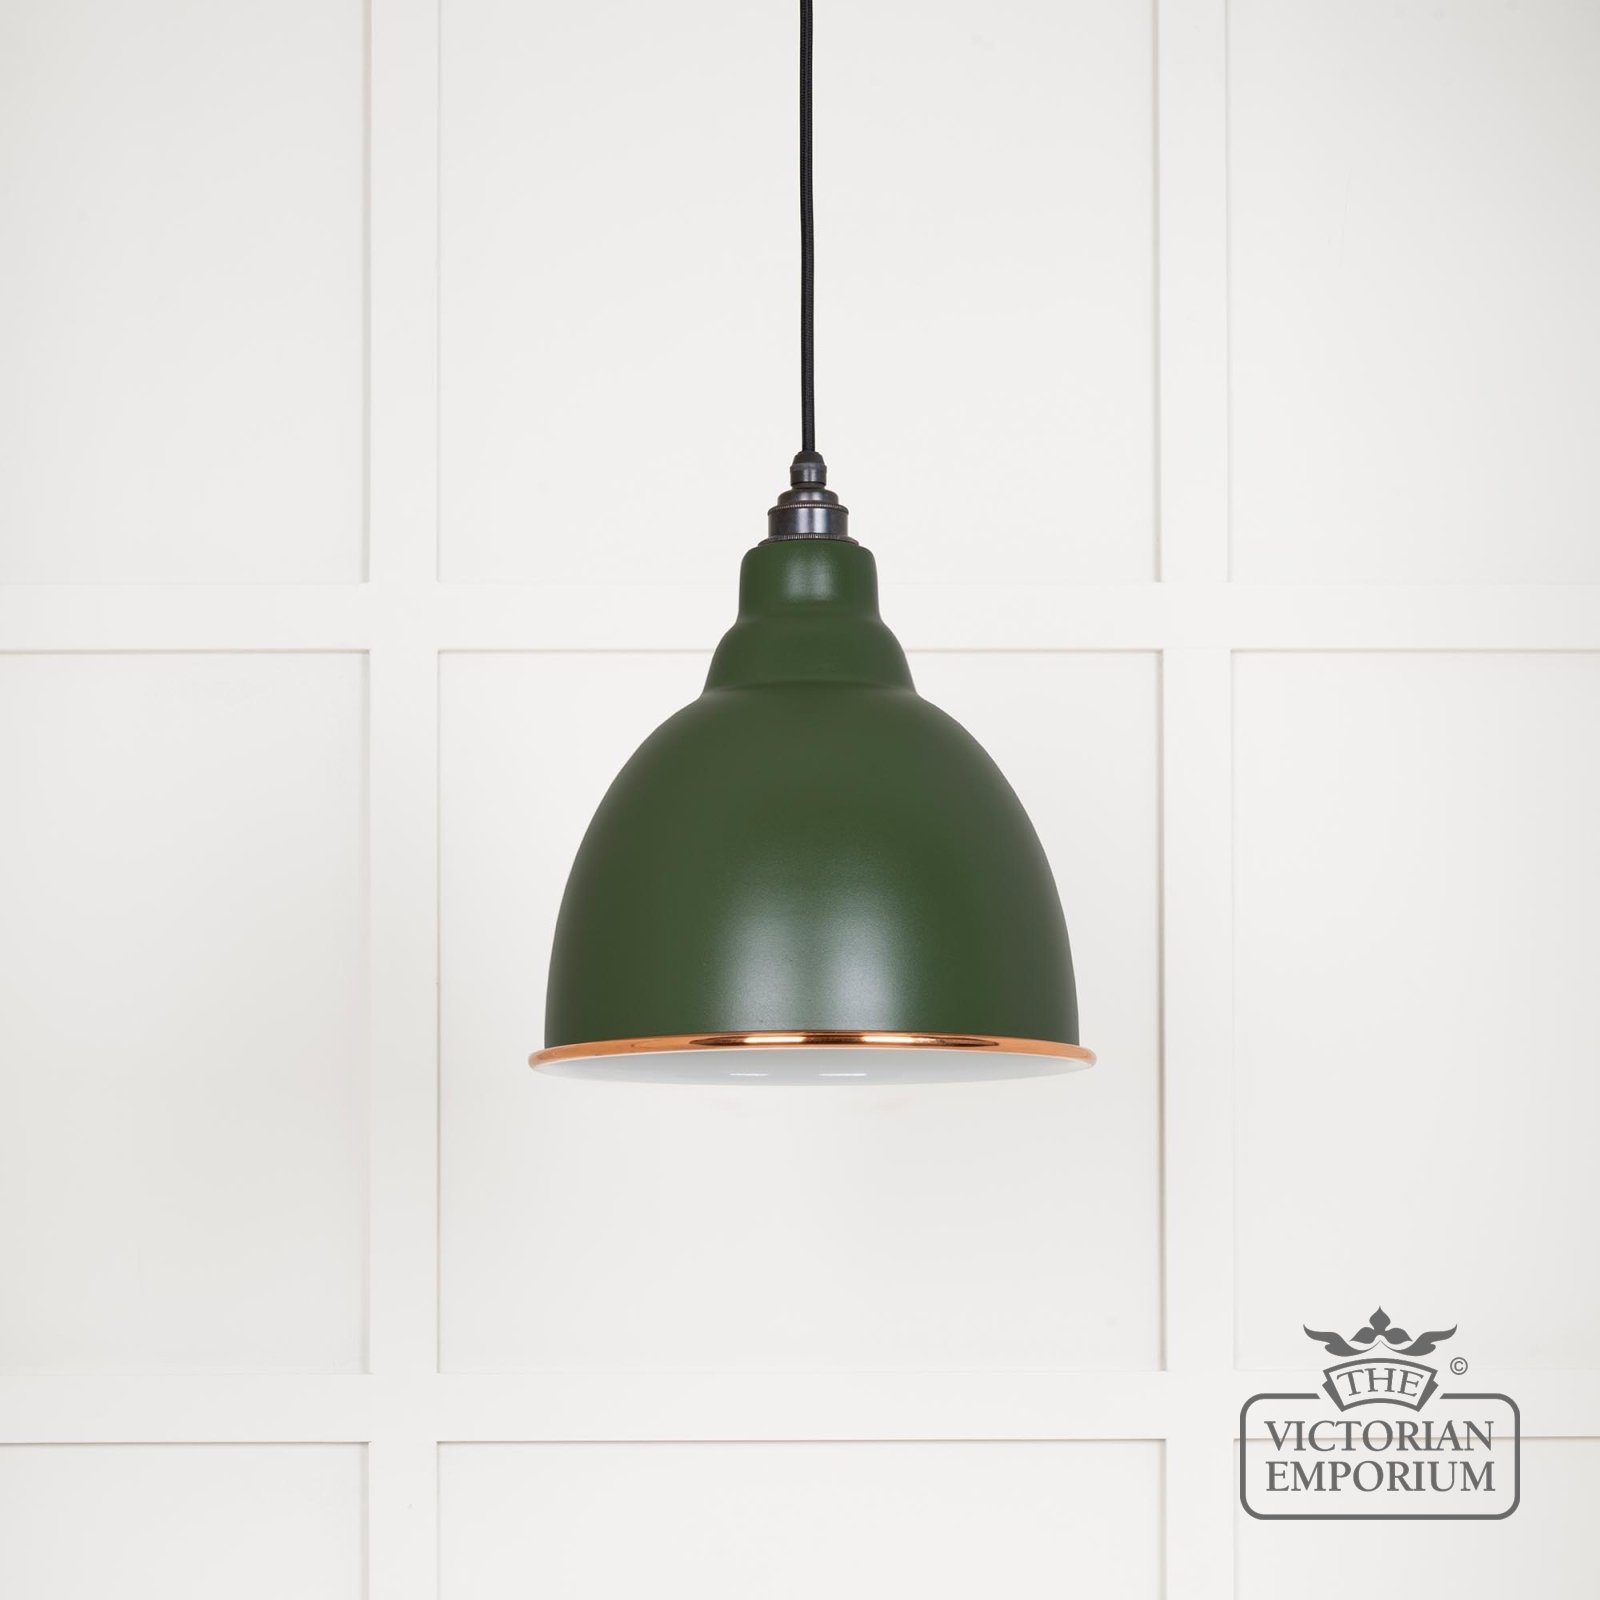 Brindle pendant light in Heath with white gloss interior